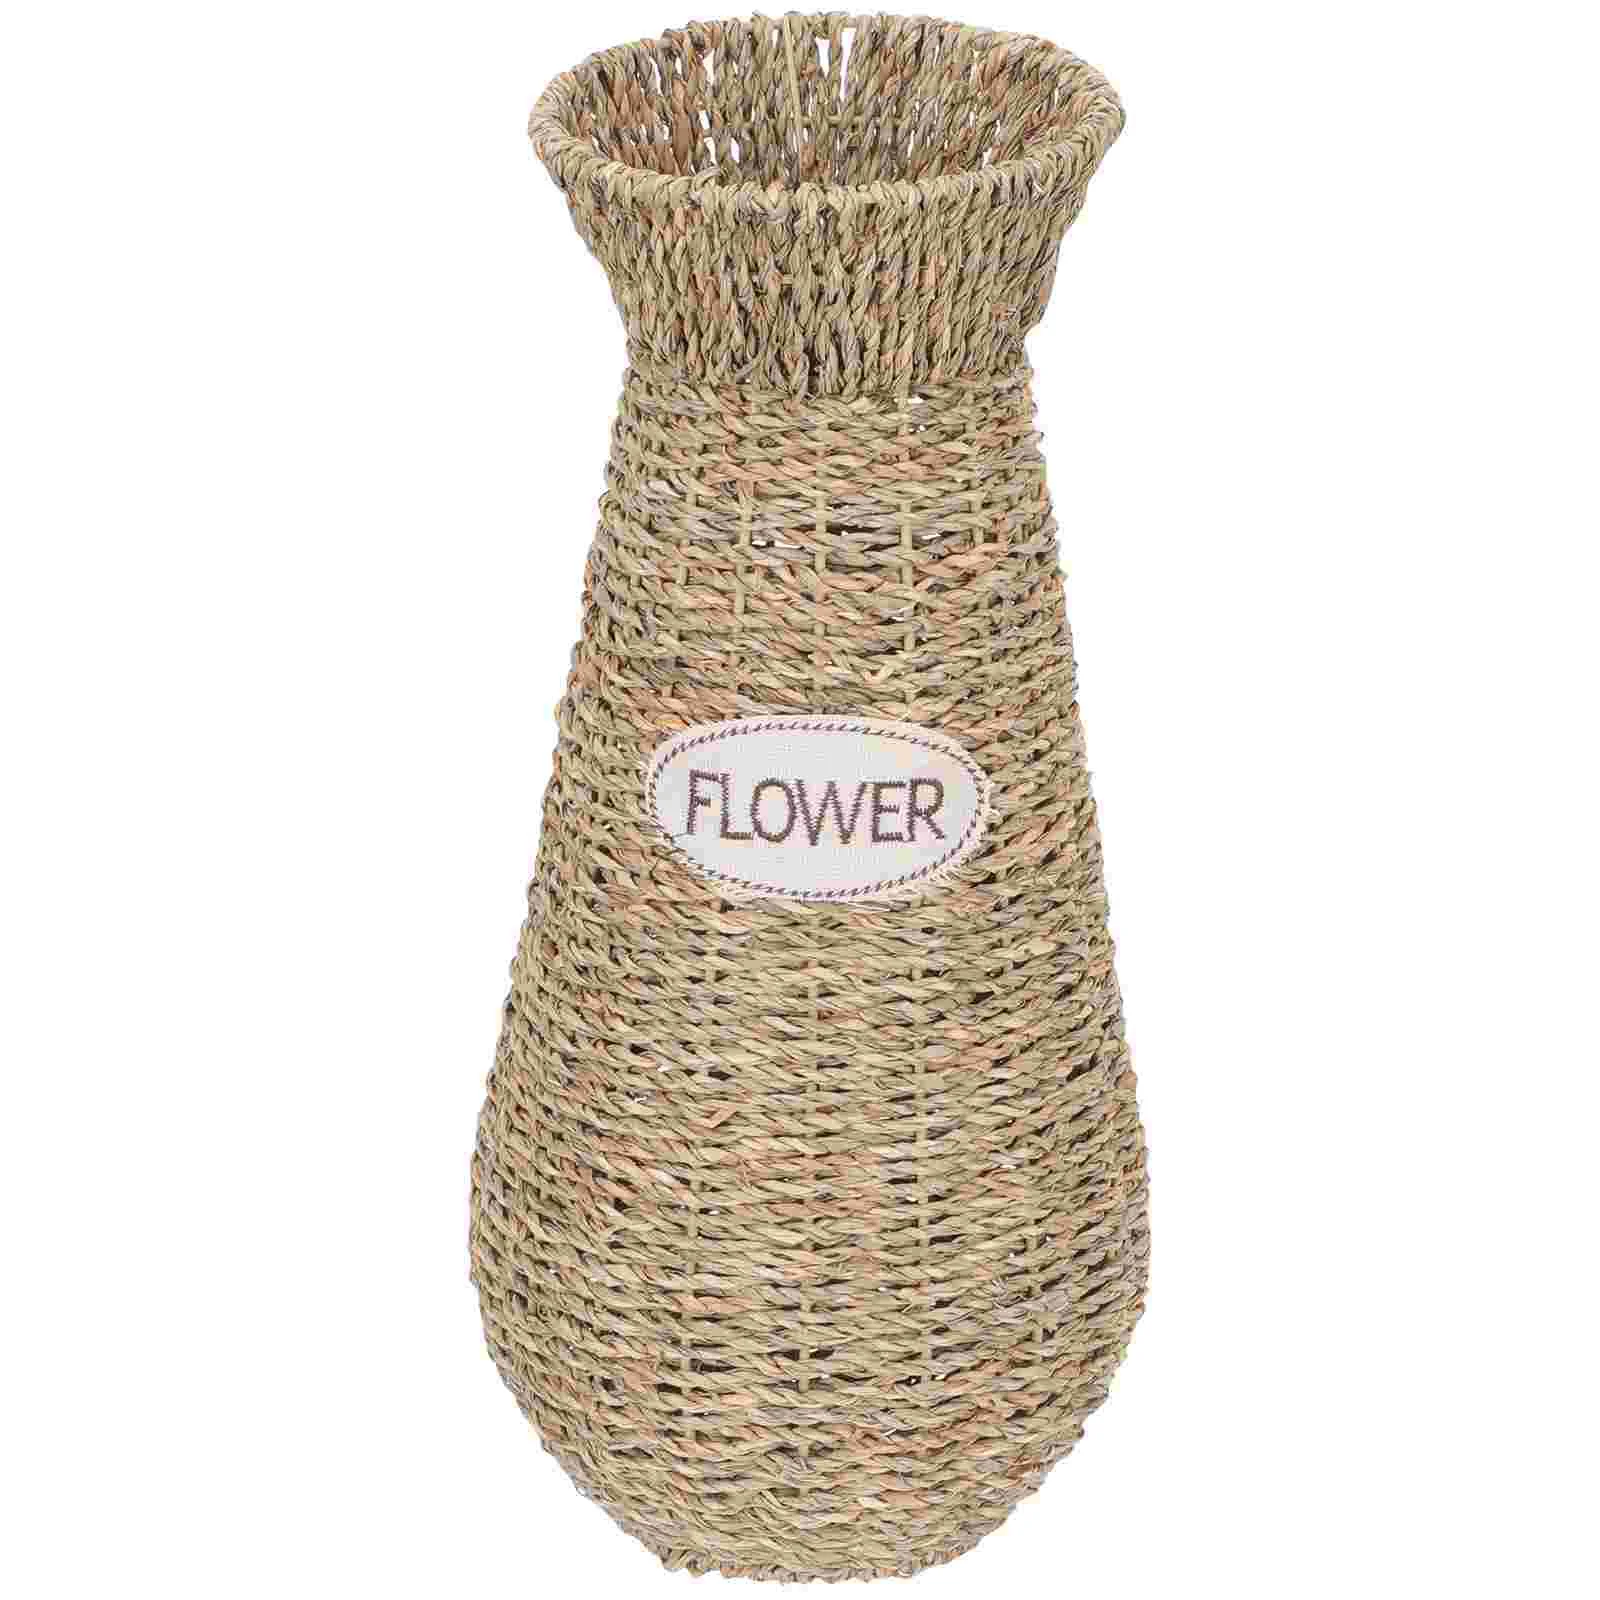 

Vase Flower Seagrass Woven Rattan Basket Tall Rustic Wicker Farmhouse Dried Weave Chinese Minimalist Vases Centerpiece Holder